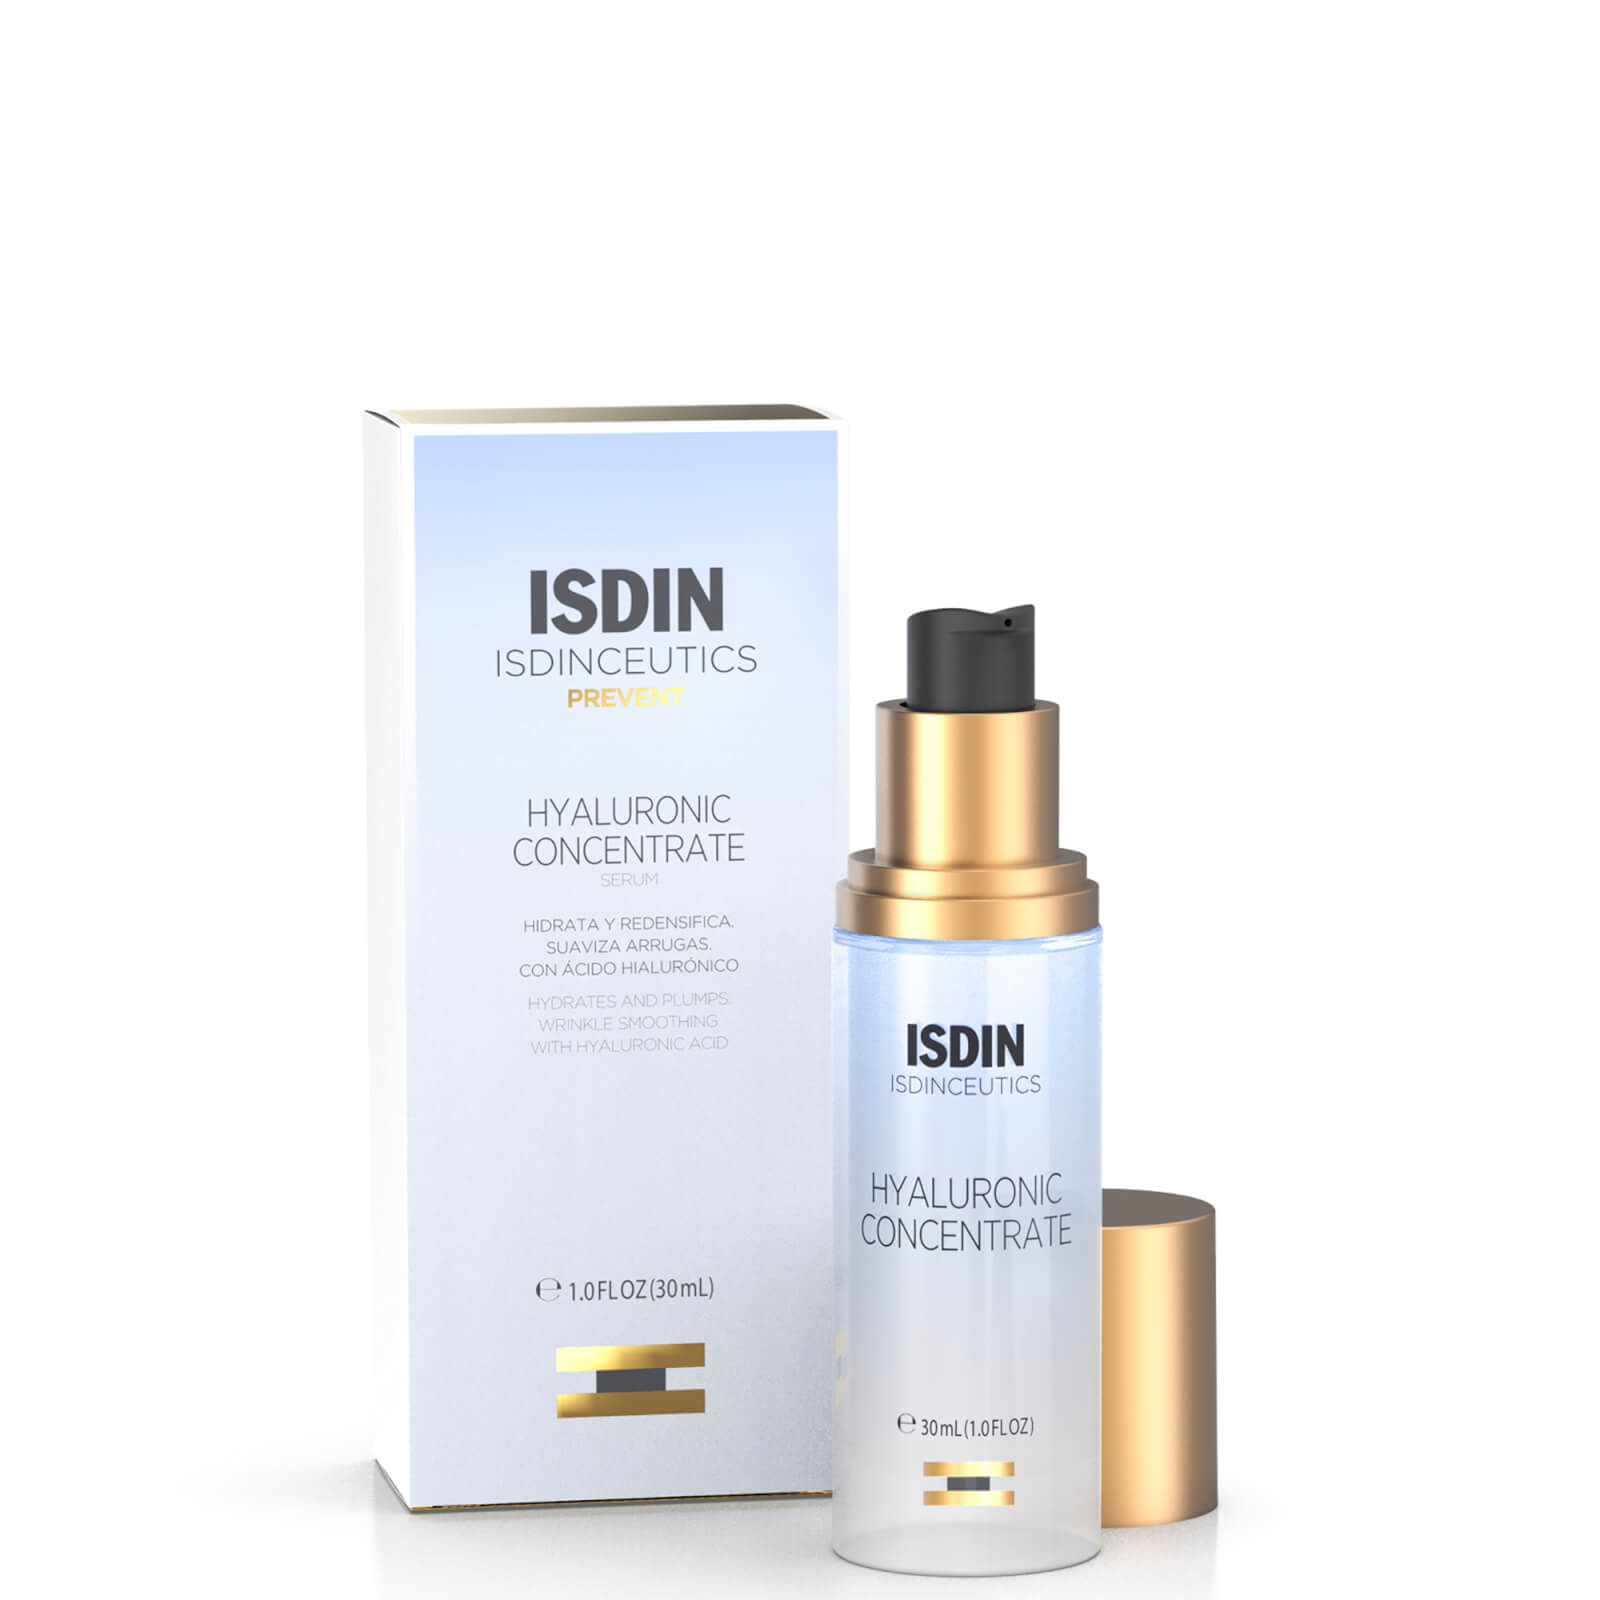 Isdin Ceutics Hyaluronic Concentrate Hydrating Hyaluronic Acid Serum 1 Fl. oz